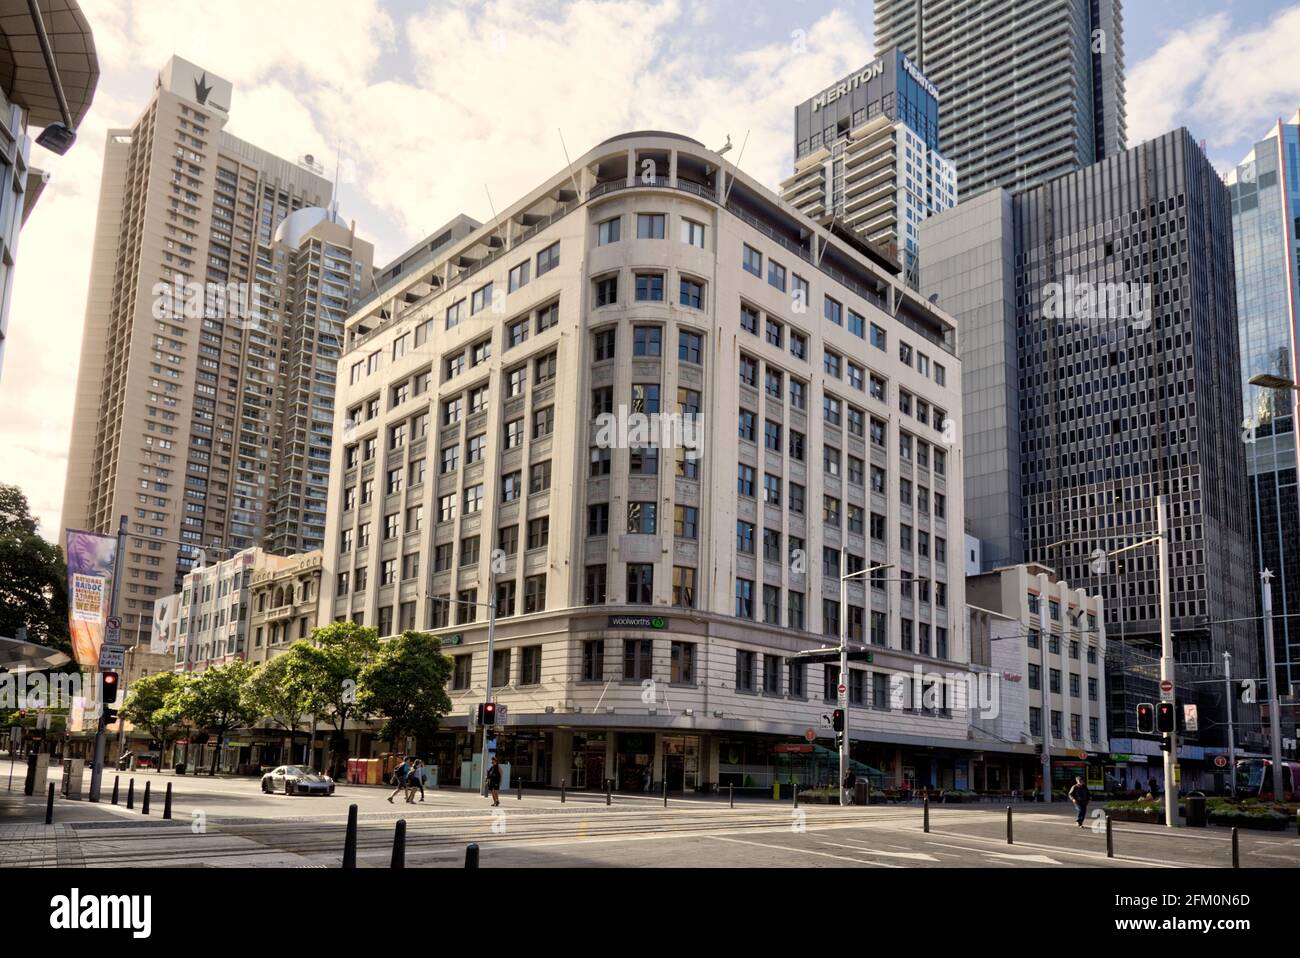 The iconic Woolworths Building (1955) built in Chicago School Design George Street Sydney Australia Stock Photo